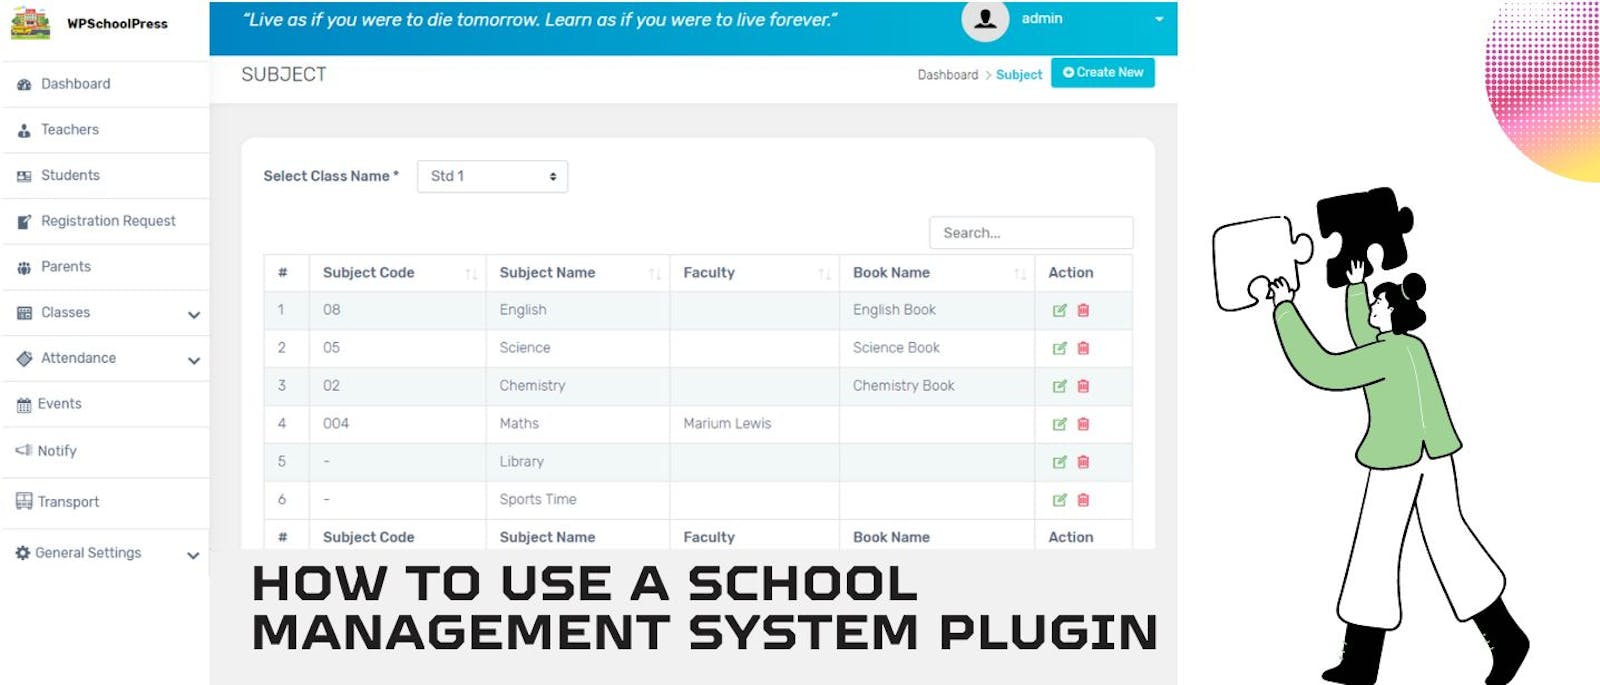 How to Use a School Management System Plugin